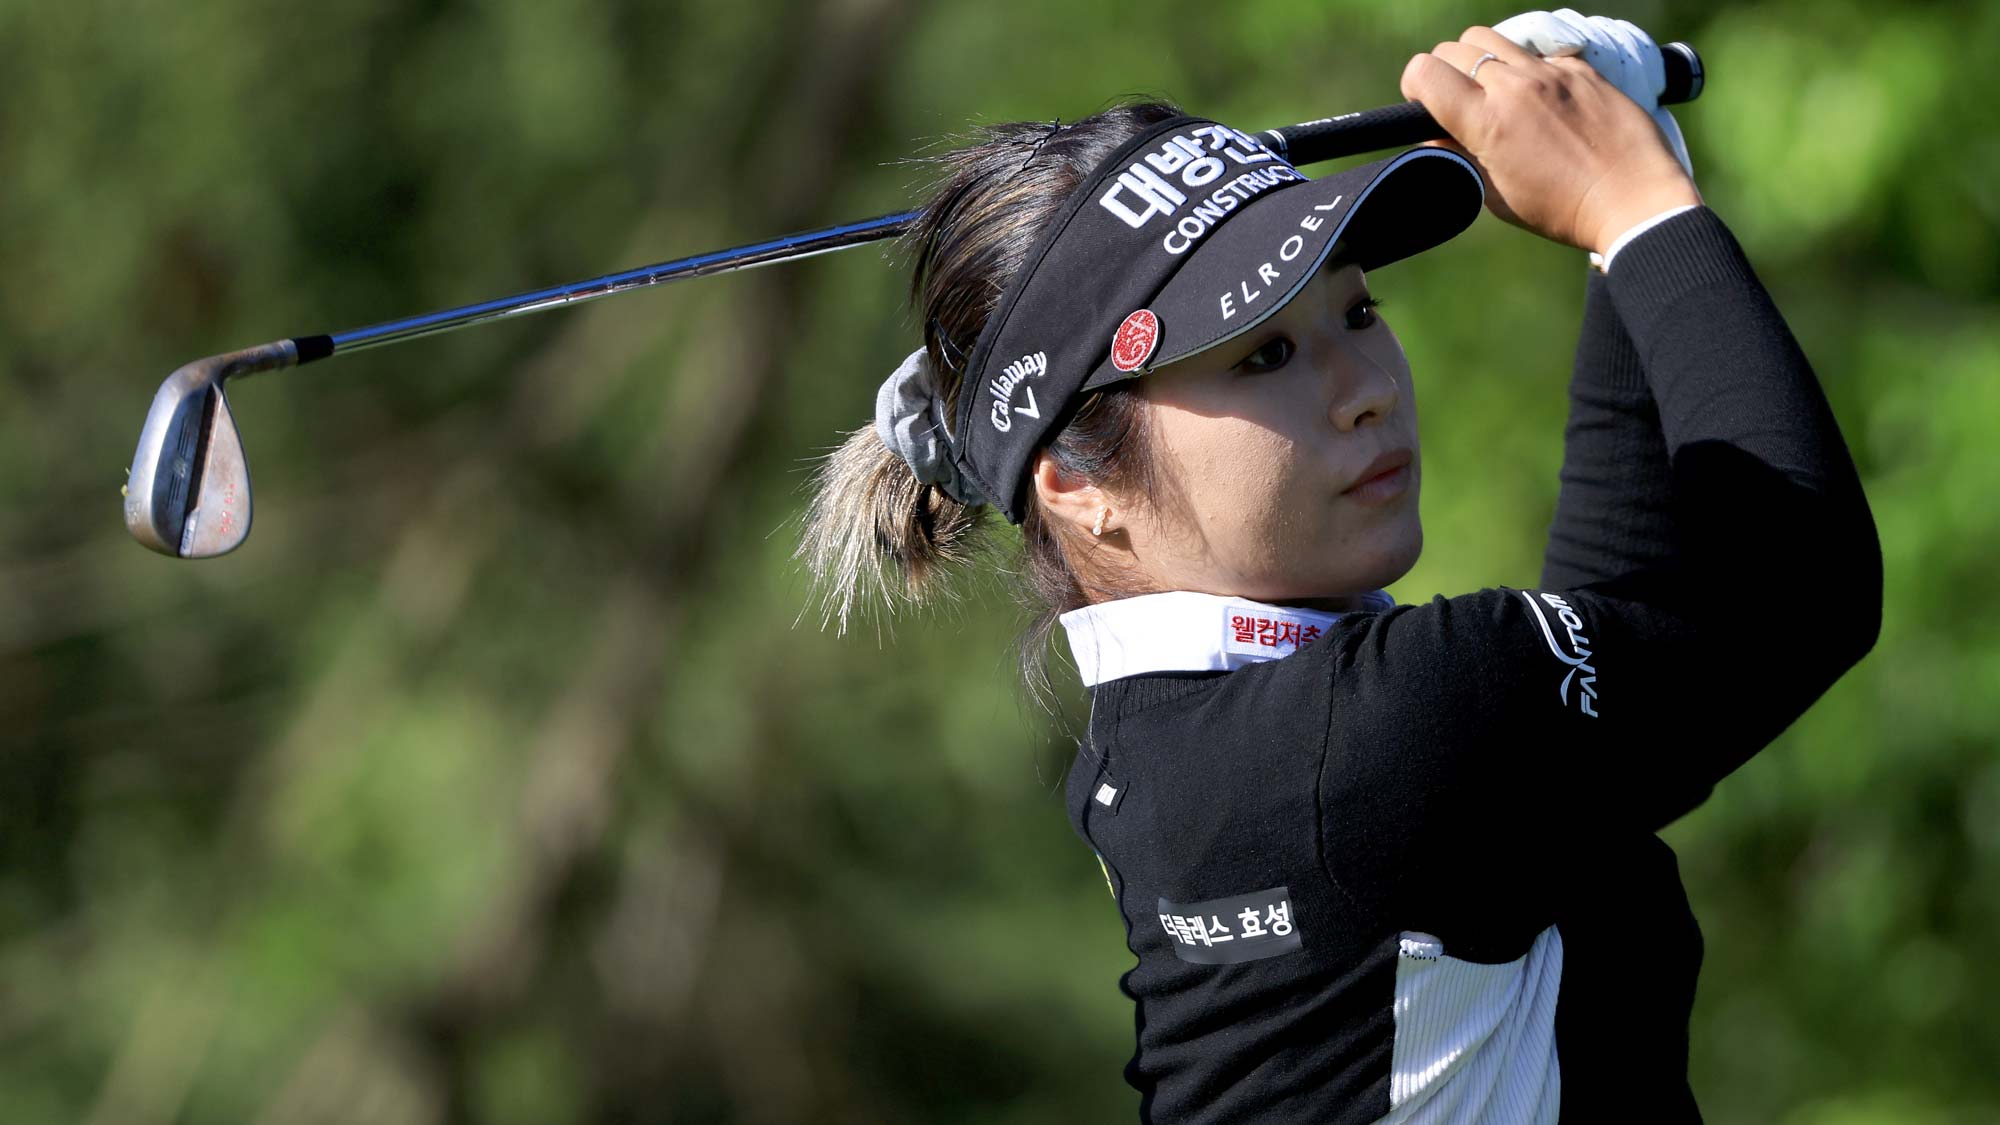 Jeongeun Lee6 of South Korea hits her tee shot on the 15th hole during the third round of the 76th U.S. Women's Open Championship 